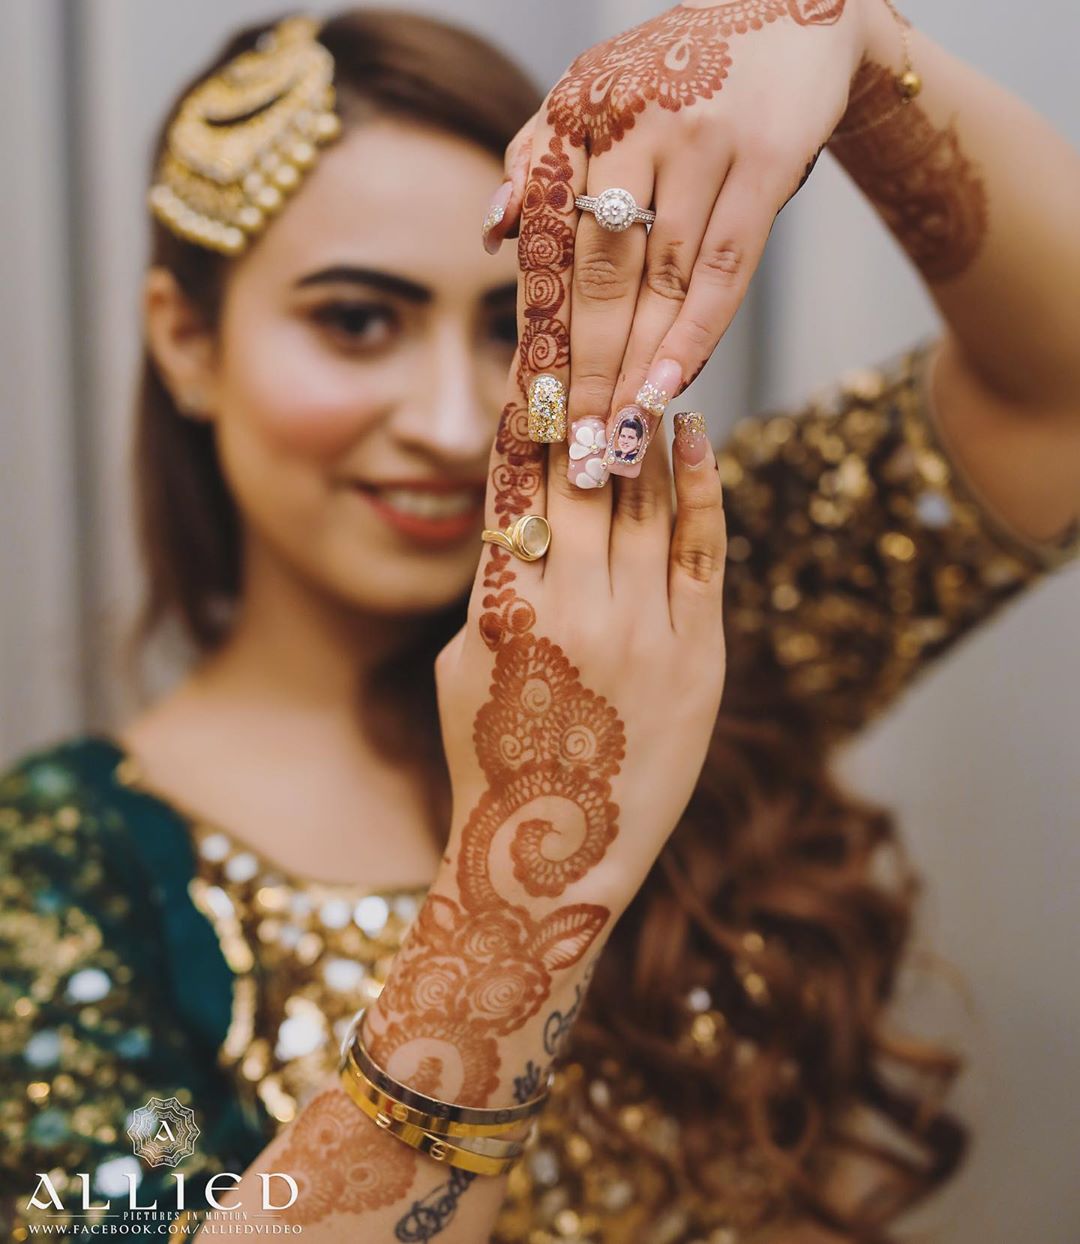 30+ Latest Bridal Nail Art Design Ideas and Tips for 2020 Brides To Be!